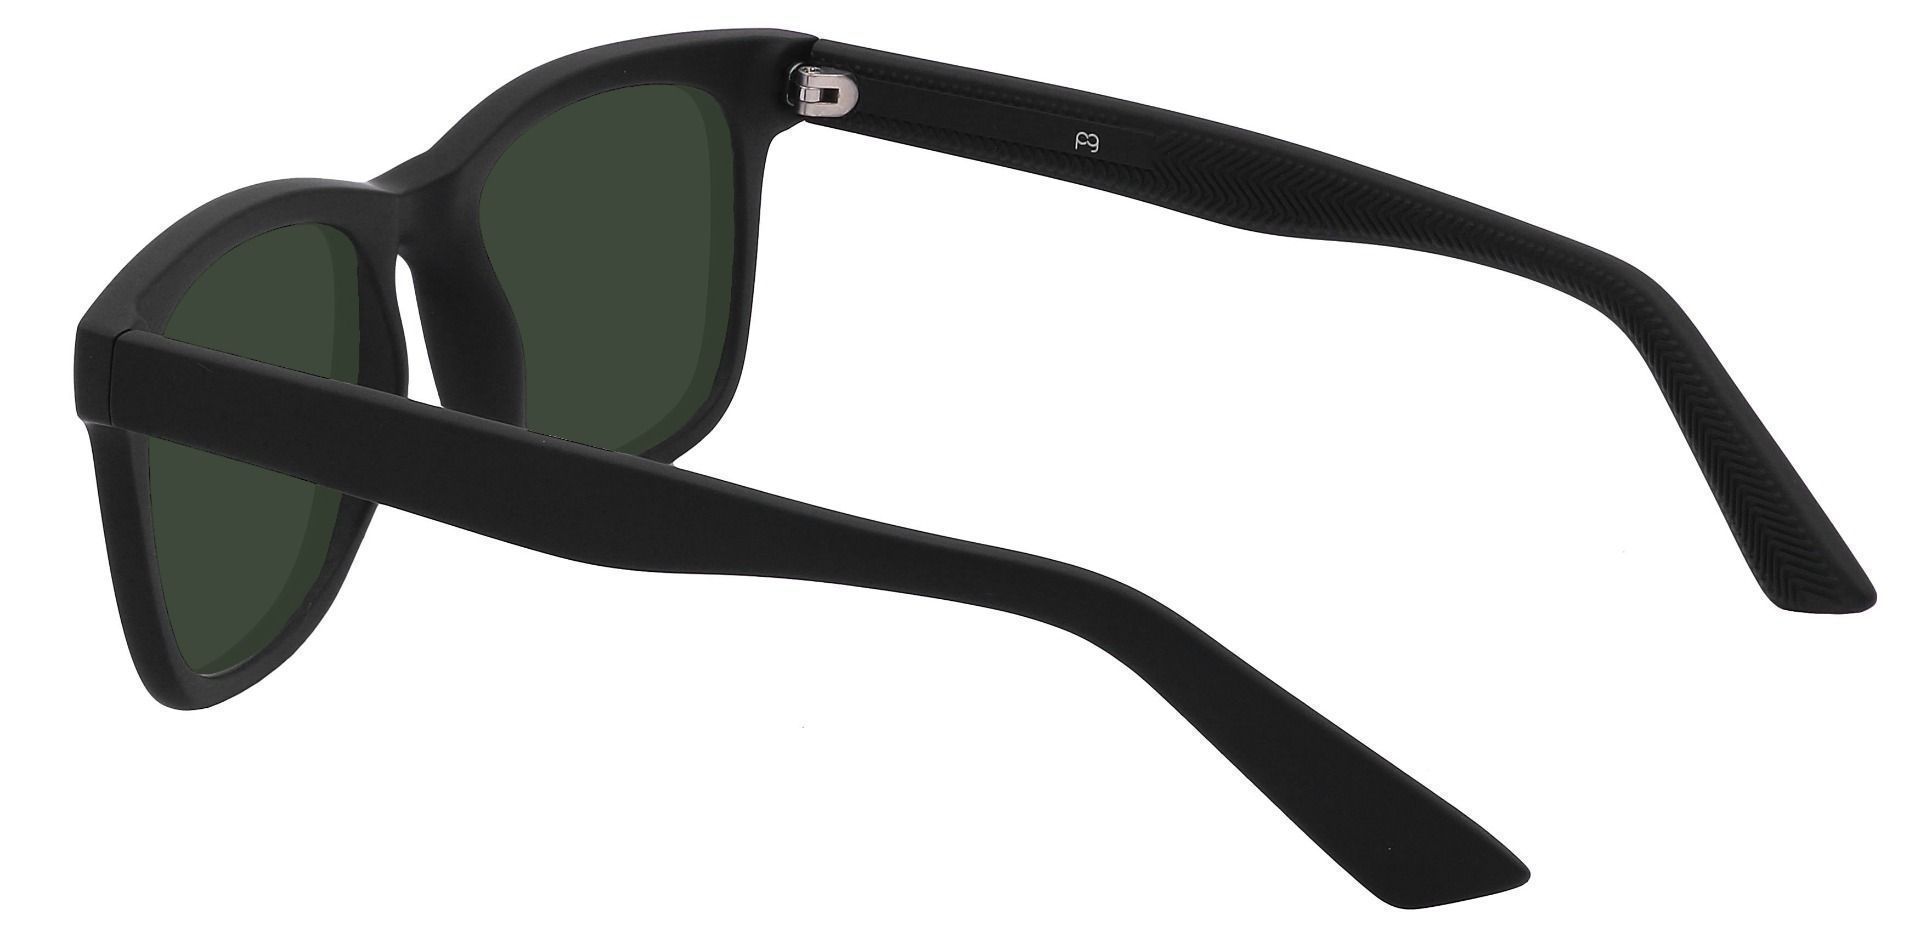 McKinley Square Non-Rx Sunglasses - Black Frame With Green Lenses